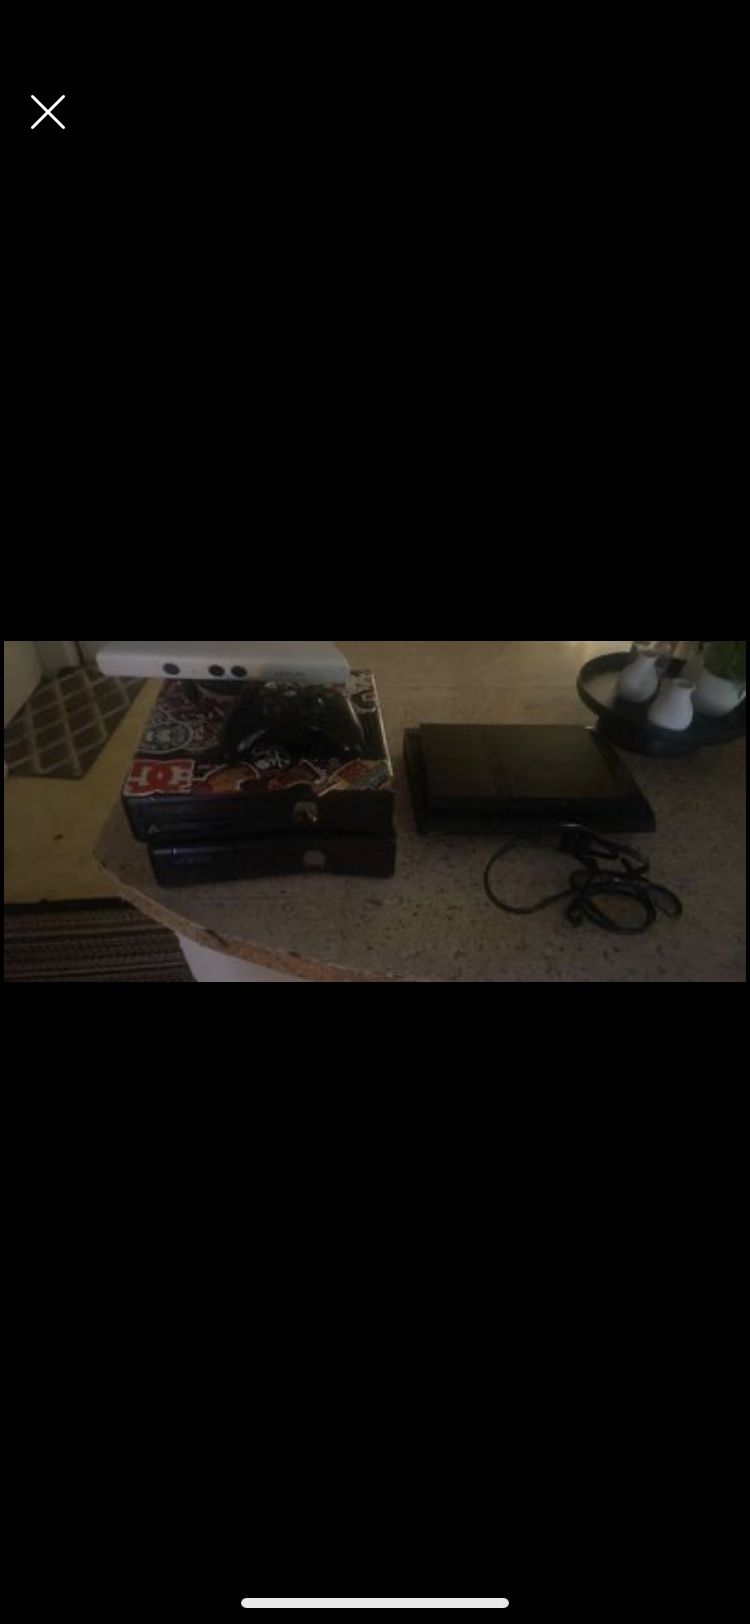 2 Xbox 360 With 2 Remotes and 2 Connects 1 Ps3 1 Ps2